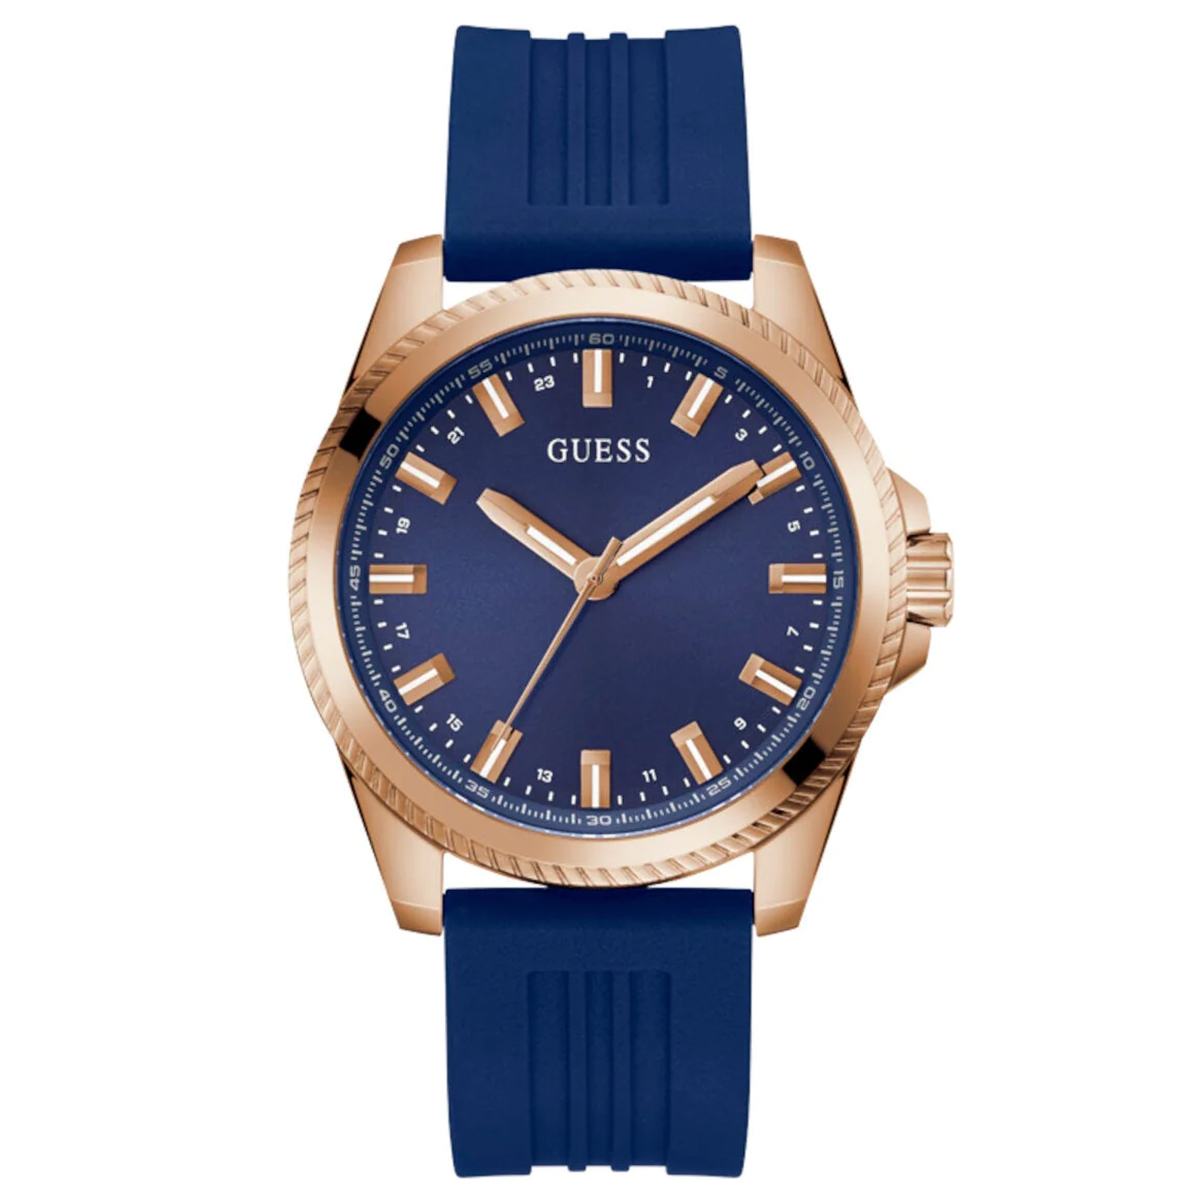 MONTRE GUESS HOMME SIMPLE SILICONE